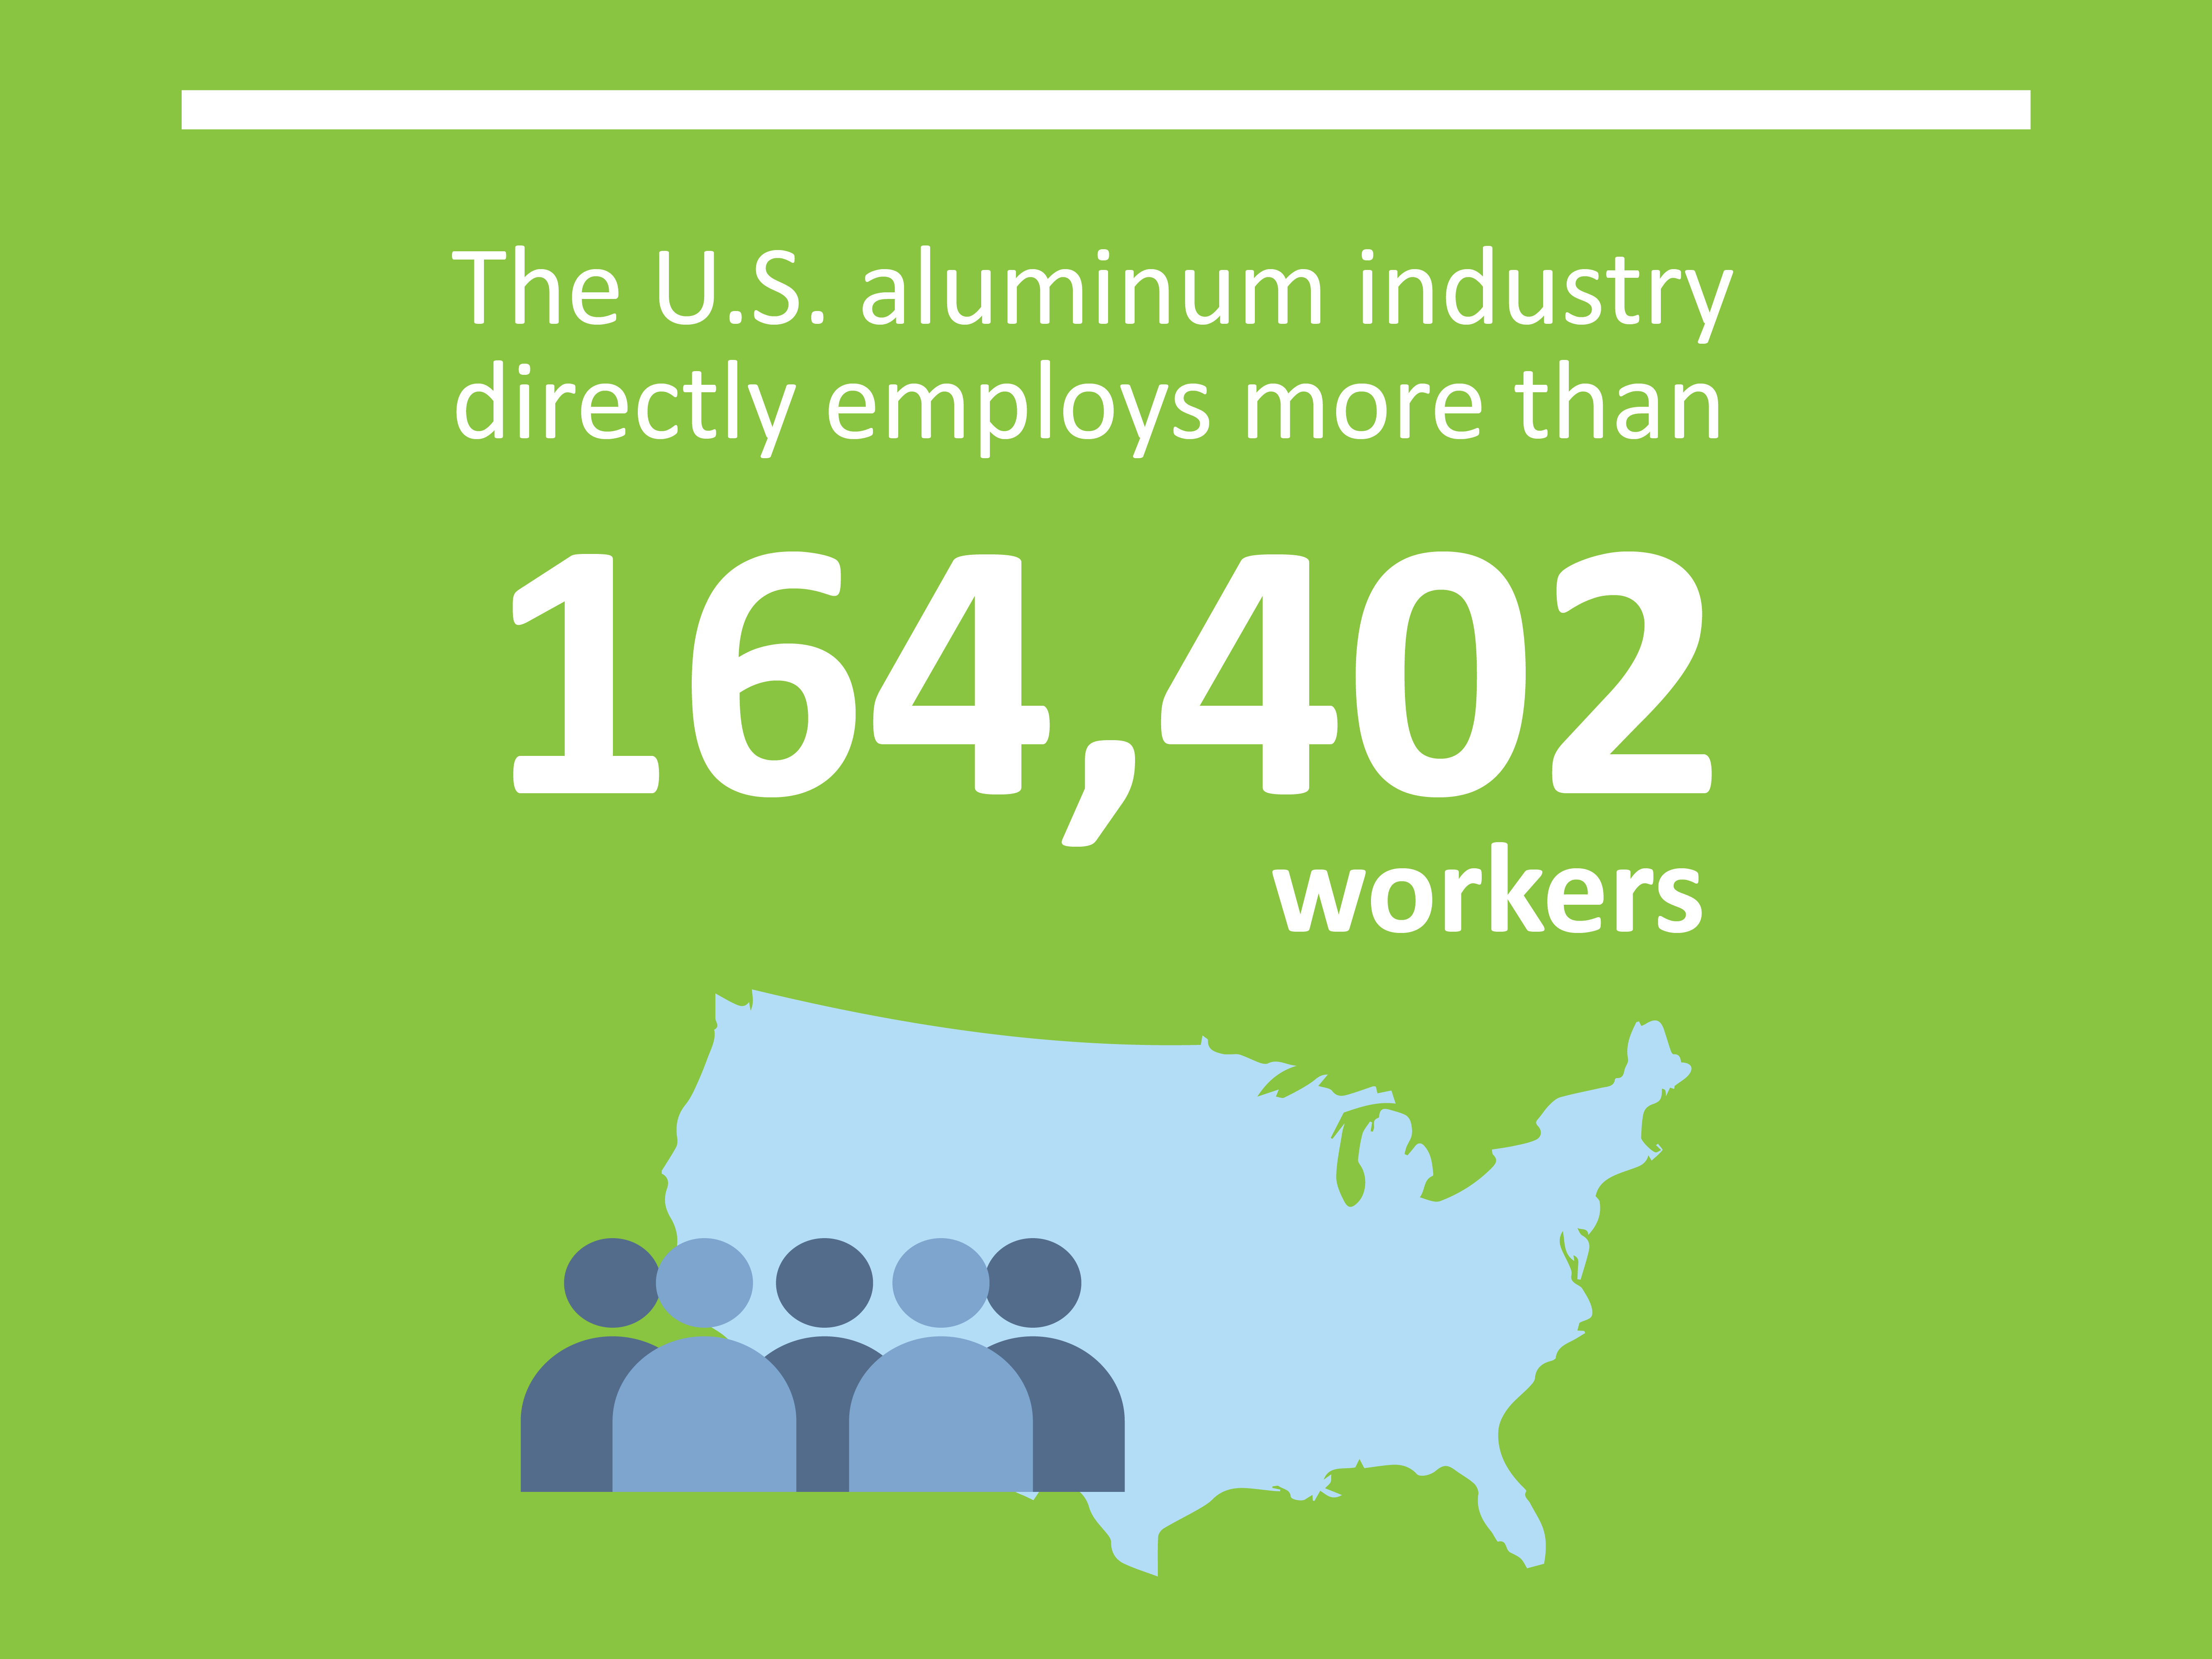 Graphic showing that the U.S. aluminum industry directly employs more than 164,402 workers